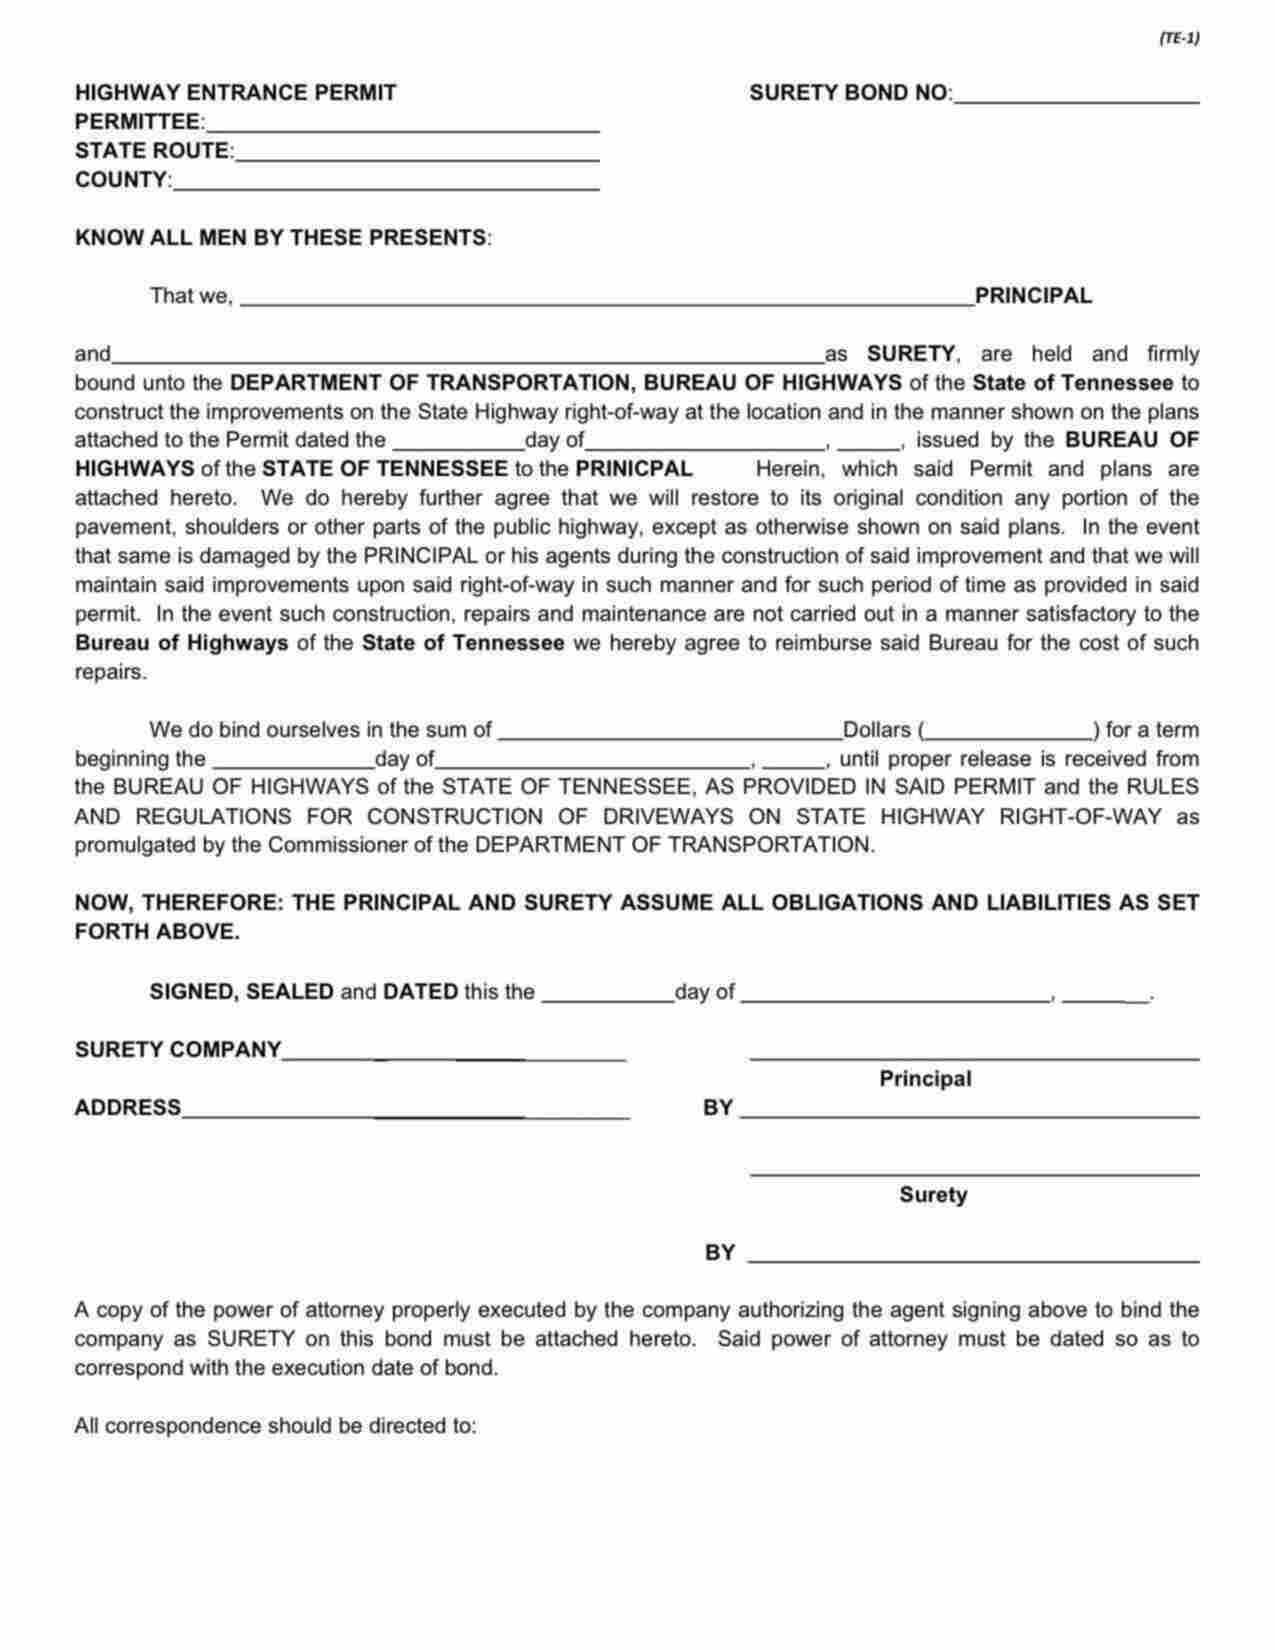 Tennessee Highway Entrance Permit Bond Form